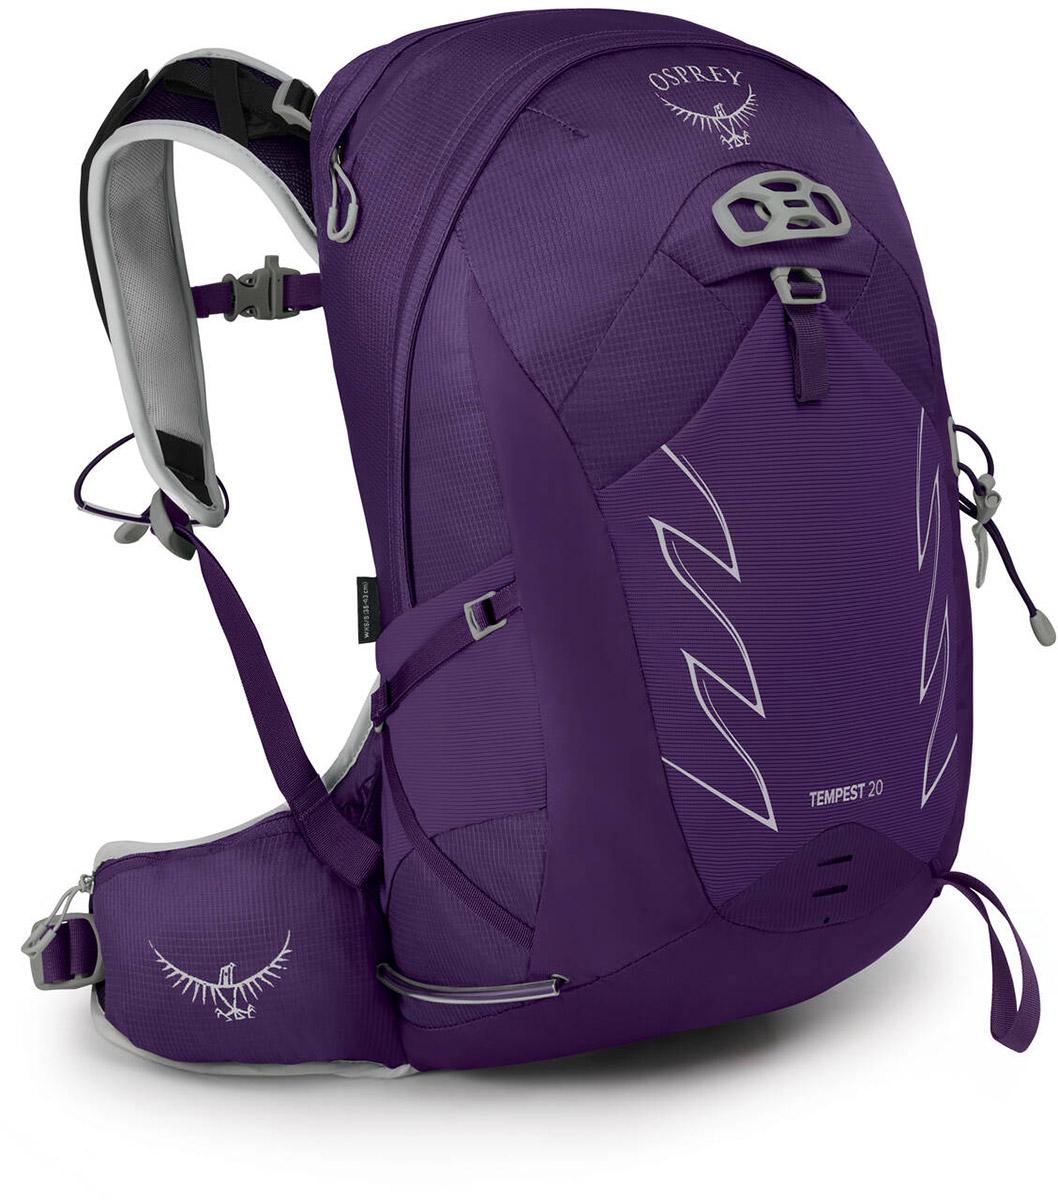 Osprey Womens Tempest 20 Backpack - Violac Purple